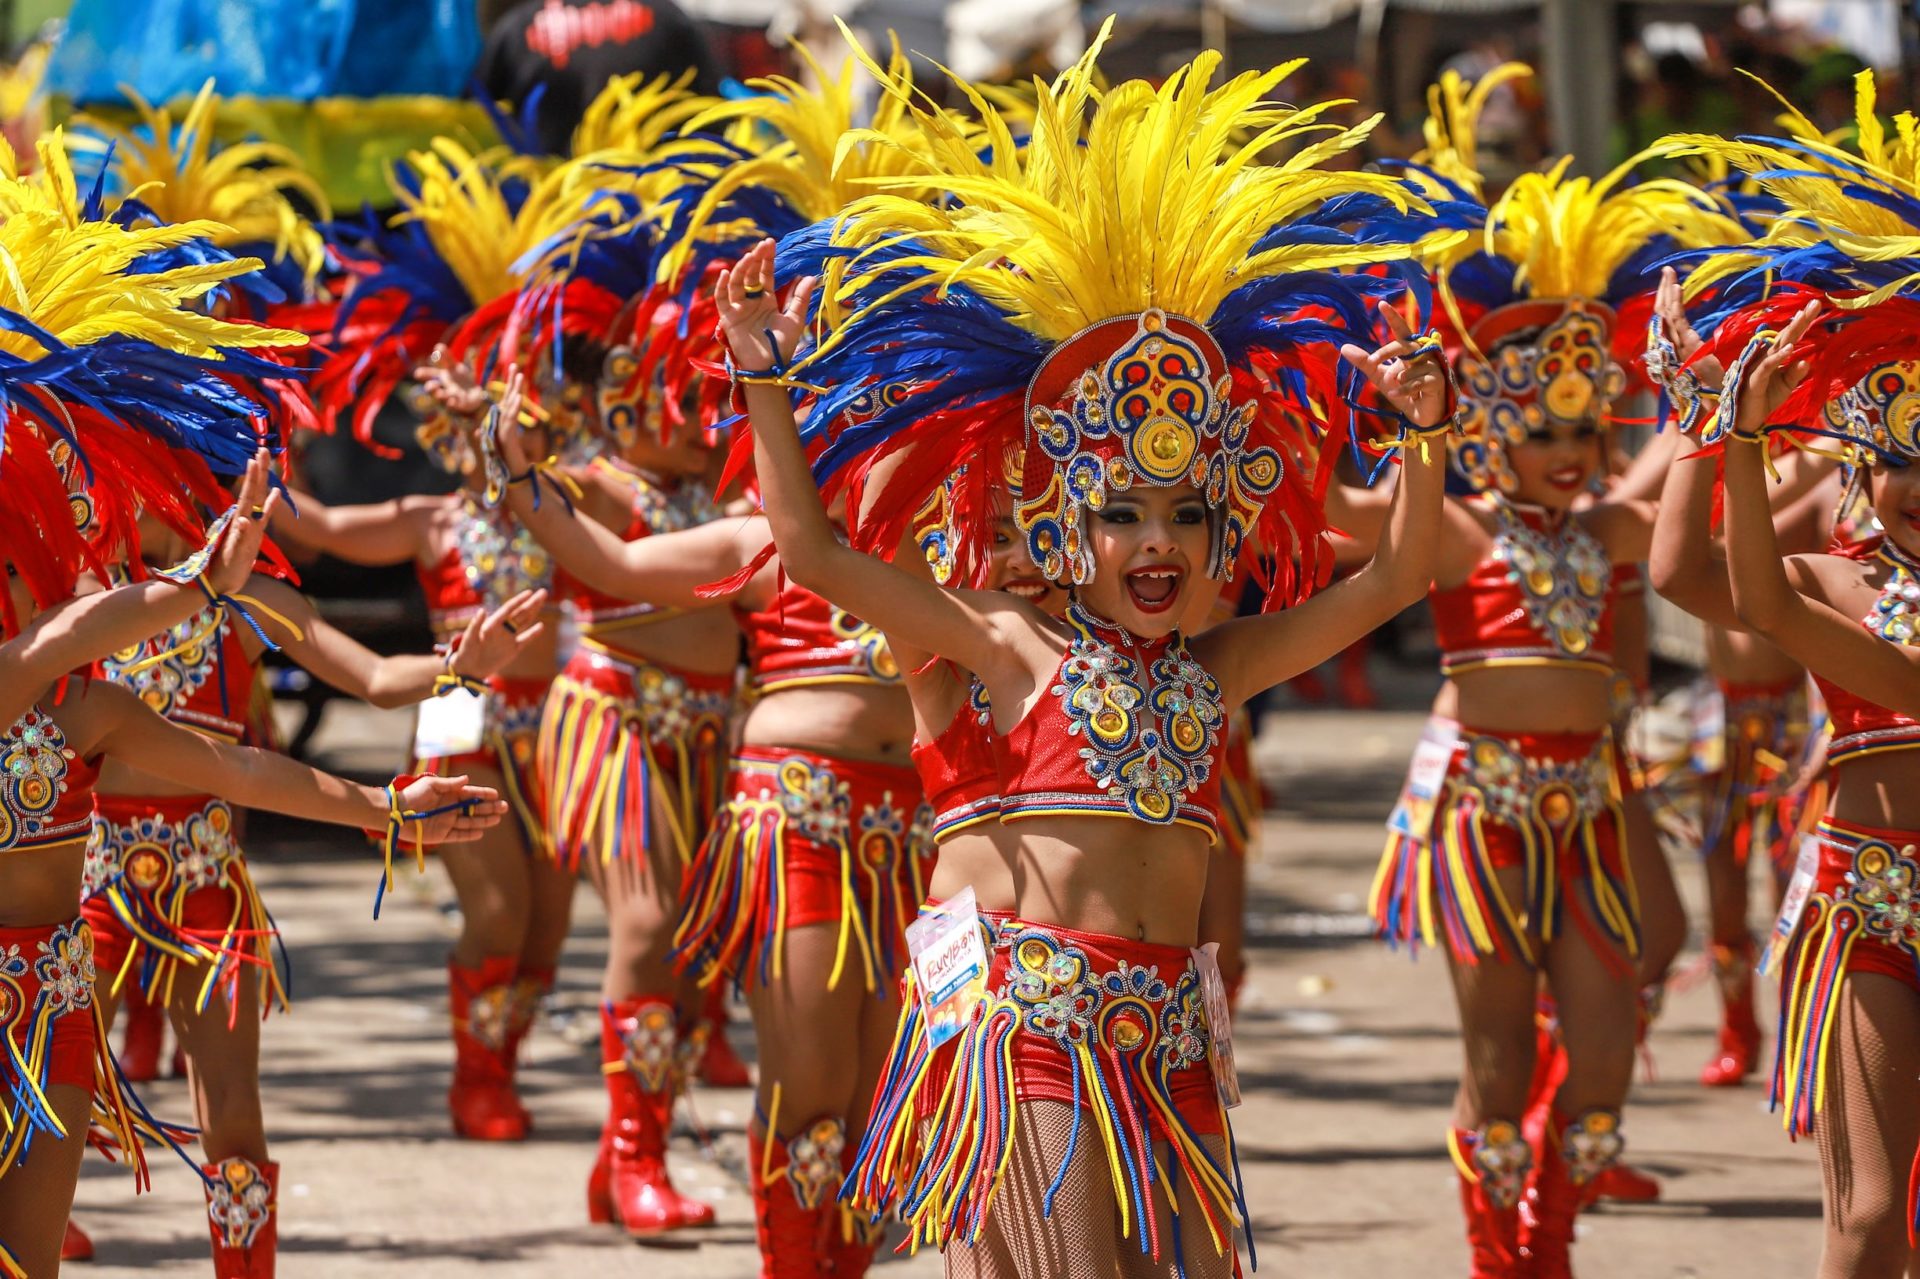 How fame impacts Barranquilla’s carnival kids